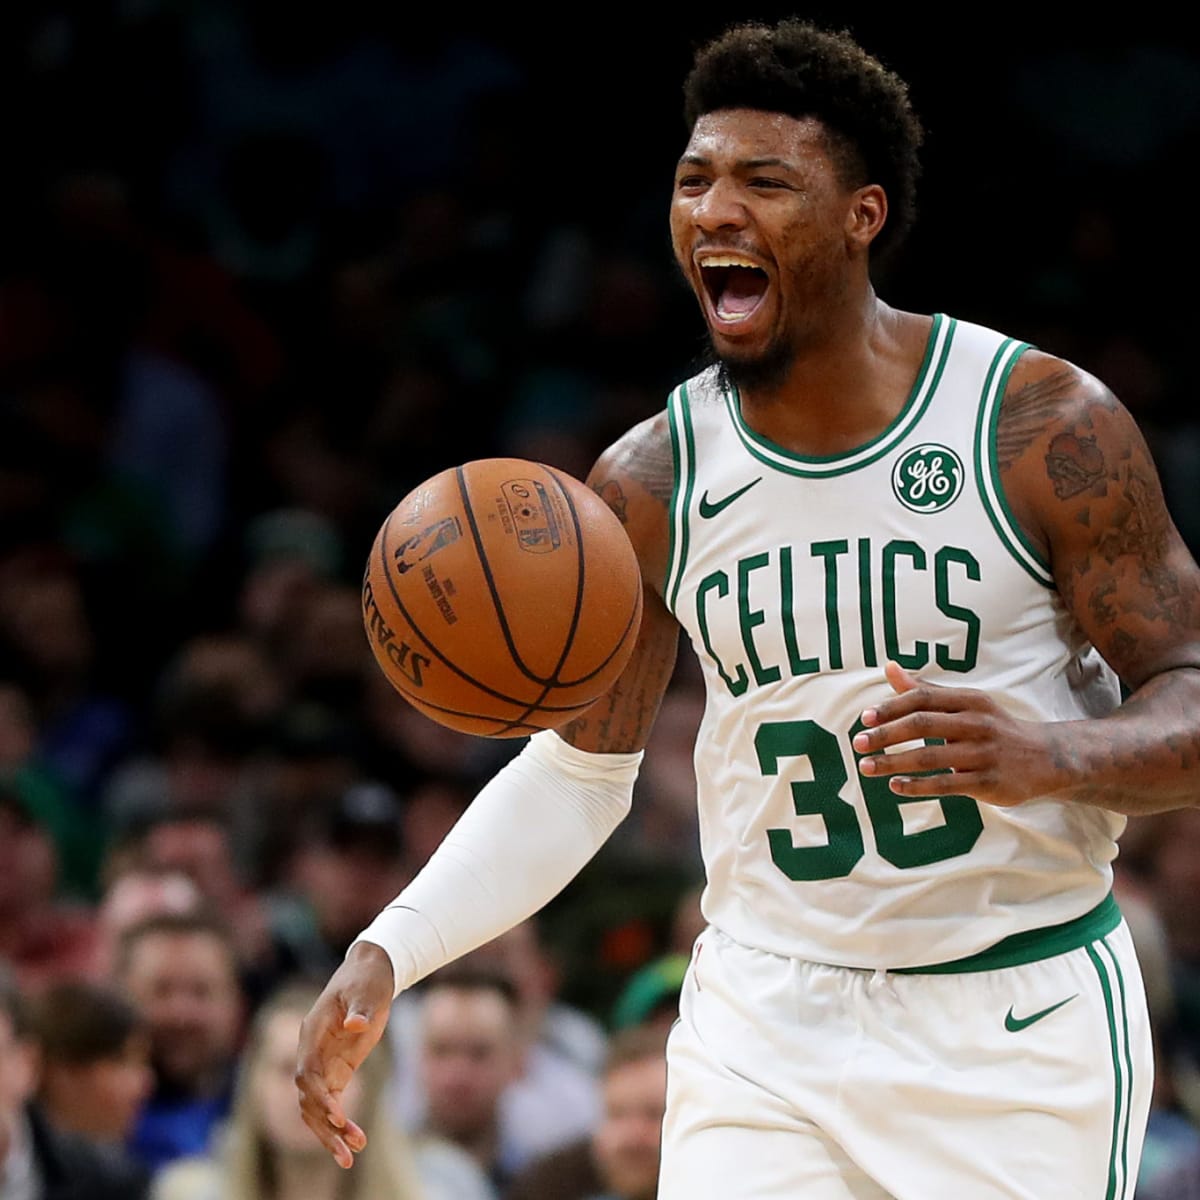 It starts over now:' Marcus Smart, searching for a title to cement his  Celtics legacy, believes this team can rise to the occasion - The Boston  Globe